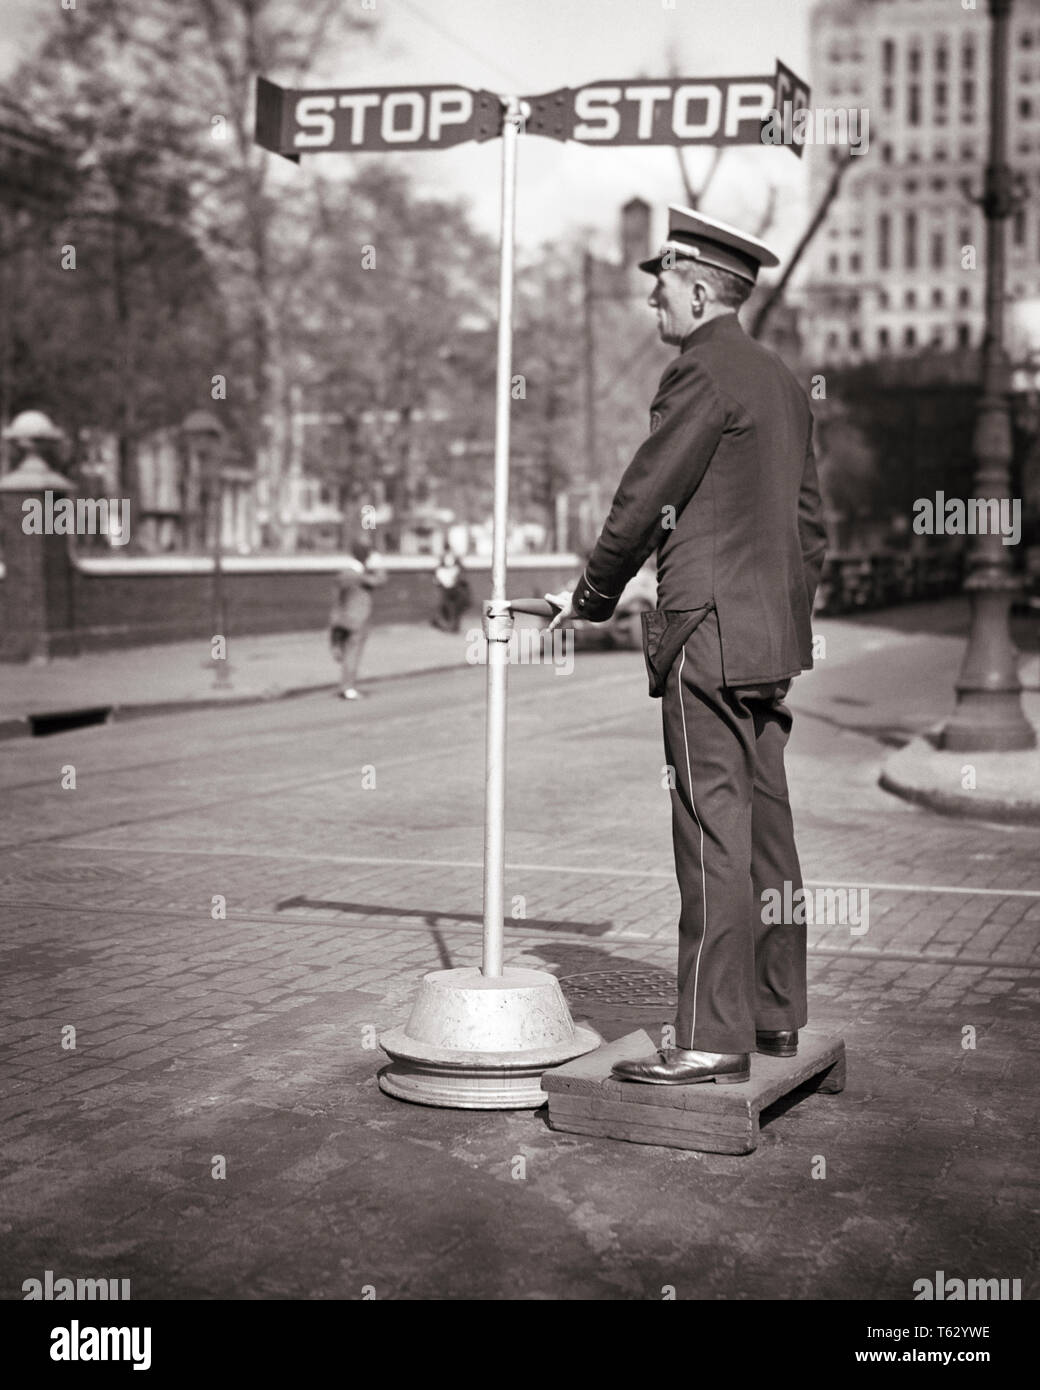 1940s TRAFFIC POLICEMAN STANDING WOODEN BOX WITH HAND-OPERATED SEMAPHORE SET AT STOP AT INDEPENDENCE SQUARE PHILADELPHIA PA USA - q41871 CPC001 HARS TRANSPORTATION B&W COP PROTECT AND SERVE PA DIRECTION OCCUPATIONS UNIFORMS OFFICERS POLICEMEN SEMAPHORE COOPERATION COPS HAND-OPERATED MID-ADULT MID-ADULT MAN SOLUTIONS BADGE BADGES BLACK AND WHITE CAUCASIAN ETHNICITY CITY OF BROTHERLY LOVE OLD FASHIONED Stock Photo